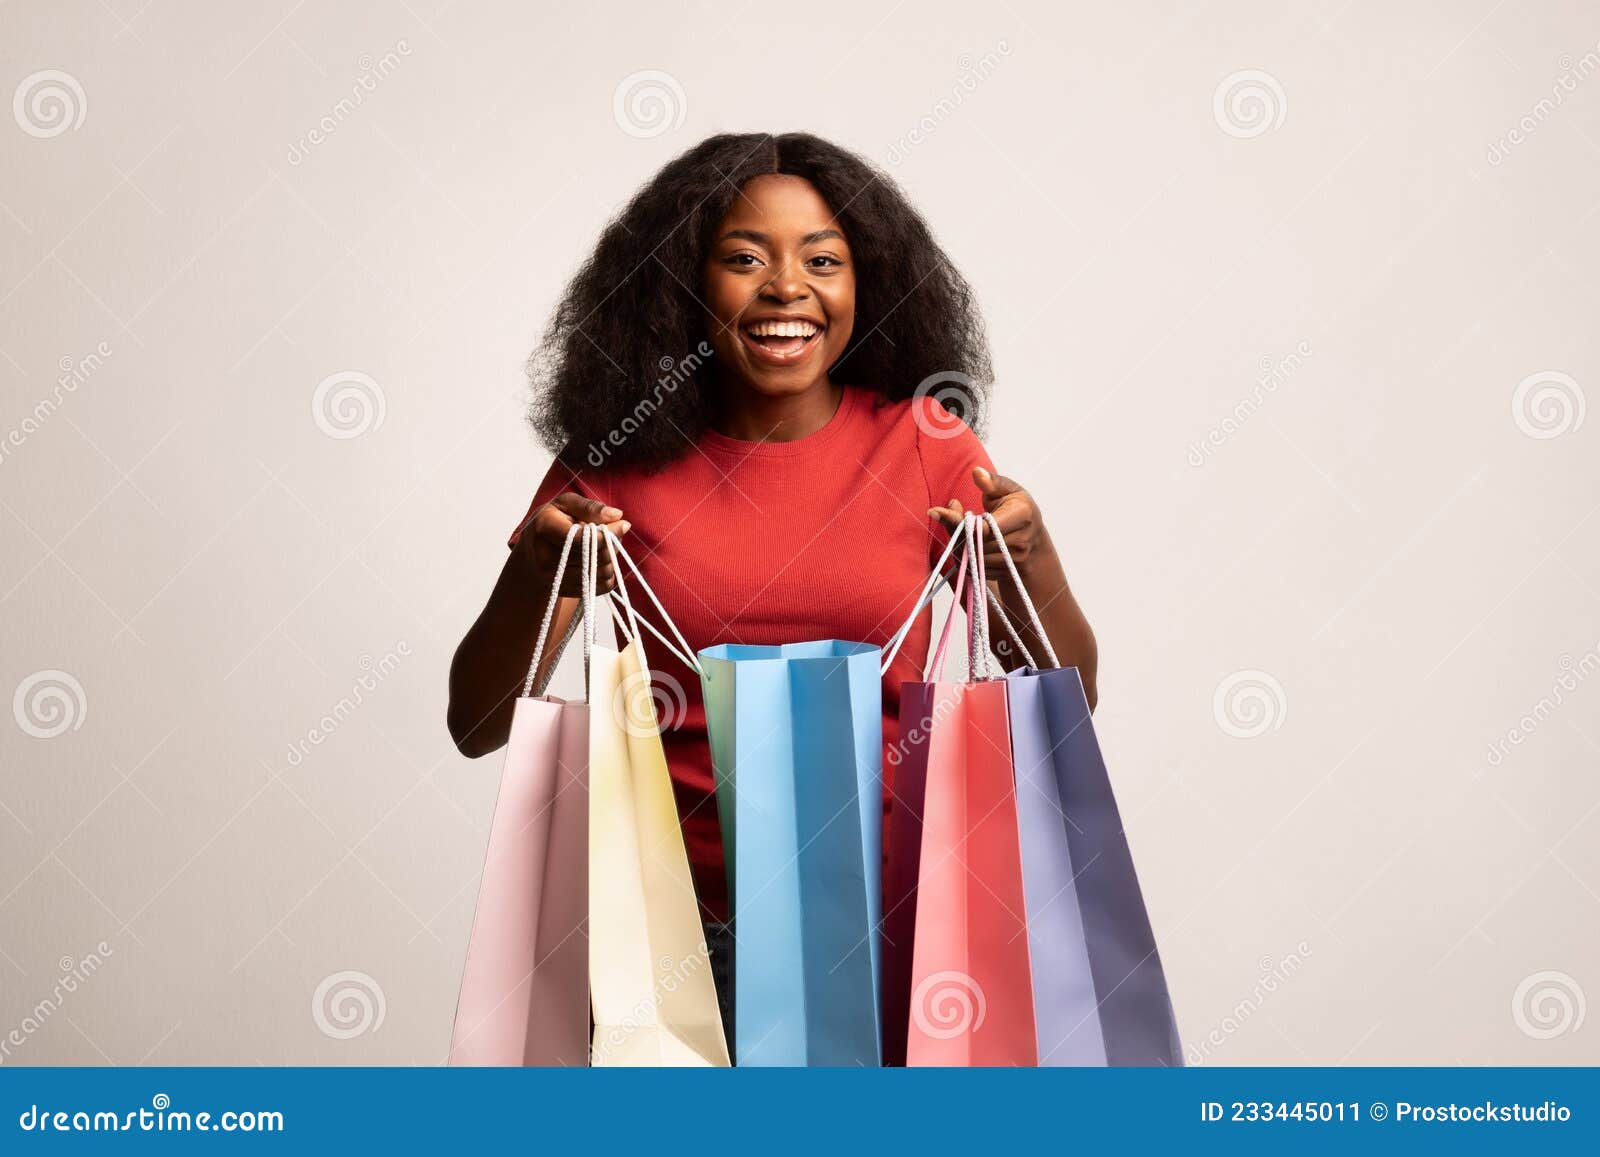 Big Sales. Happy Black Lady Holding Lots of Bright Paper Shopping Bags ...